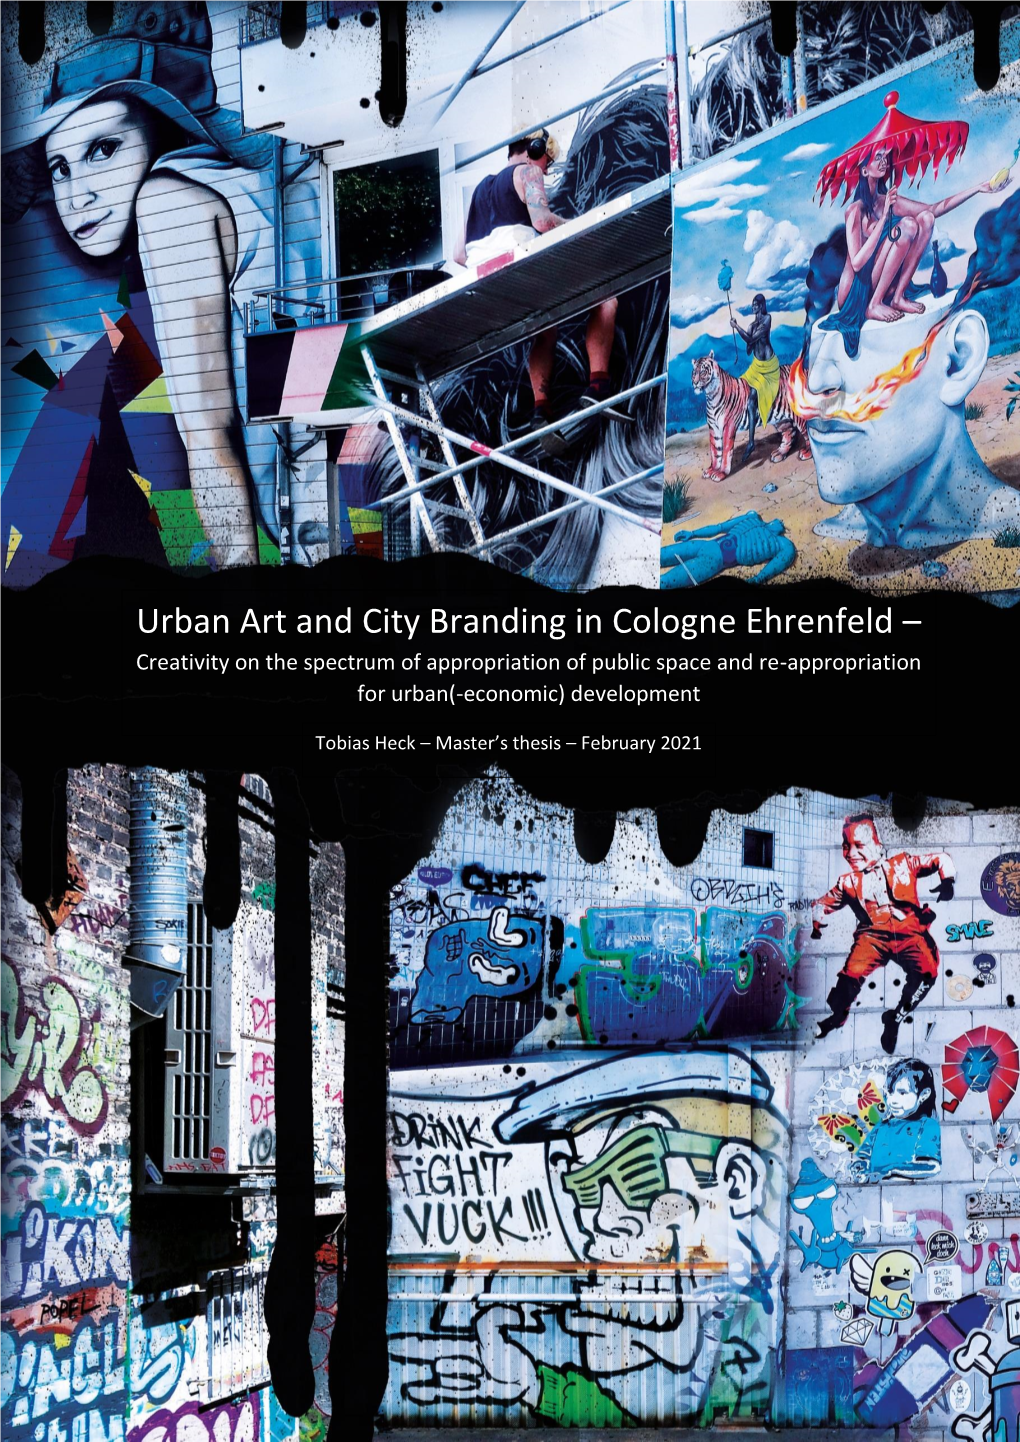 Urban Art and City Branding in Cologne Ehrenfeld – Creativity on the Spectrum of Appropriation of Public Space and Re-Appropriation for Urban(-Economic) Development